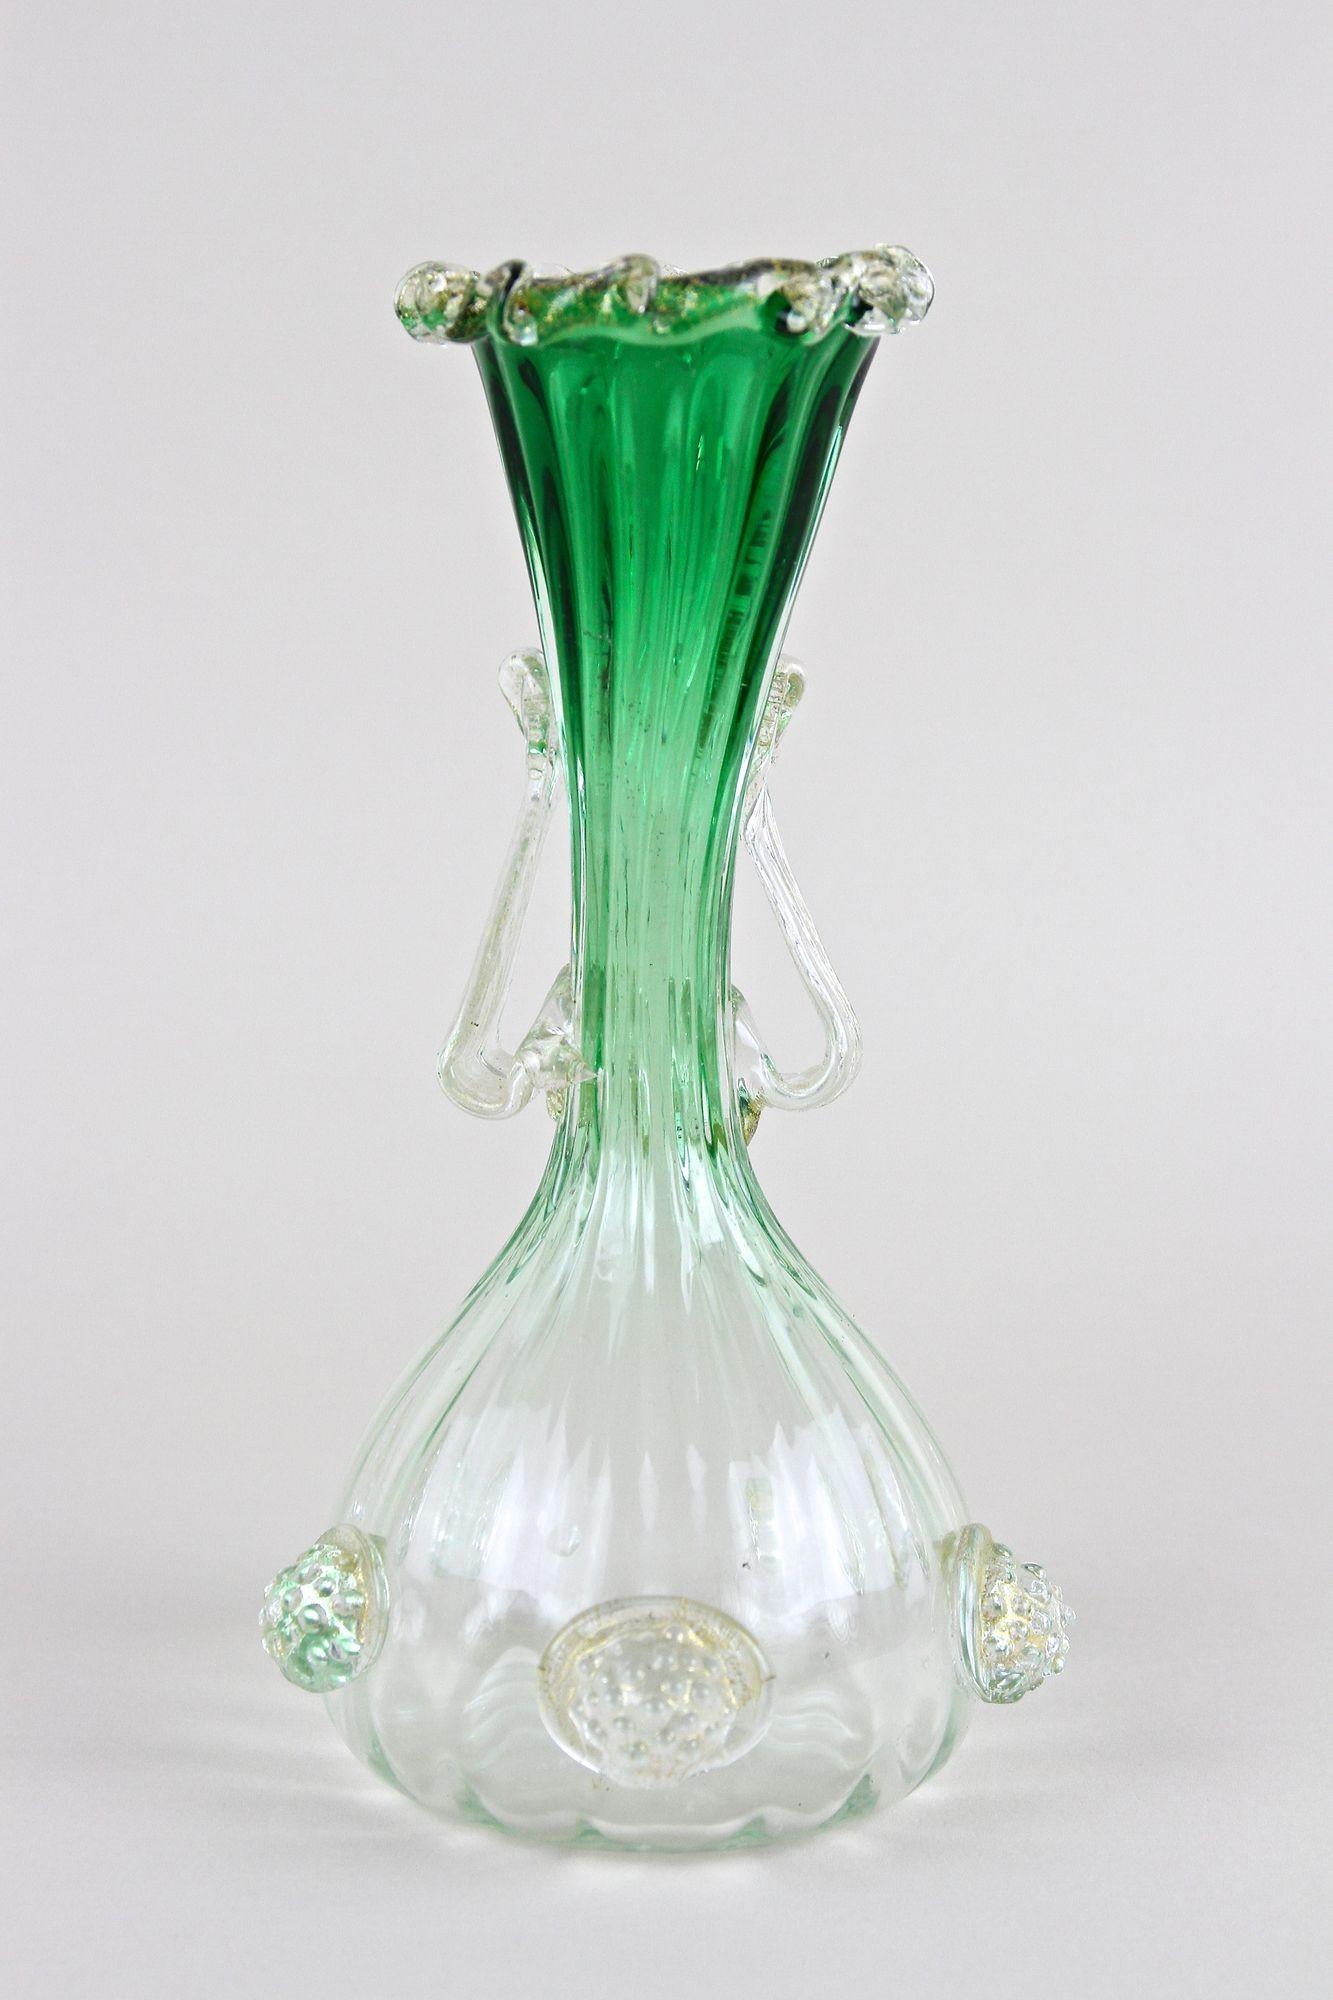 Green/ White Murano Glass Vase With 24k Gold Flakes by Fratelli Toso, IT ca 1930 For Sale 2